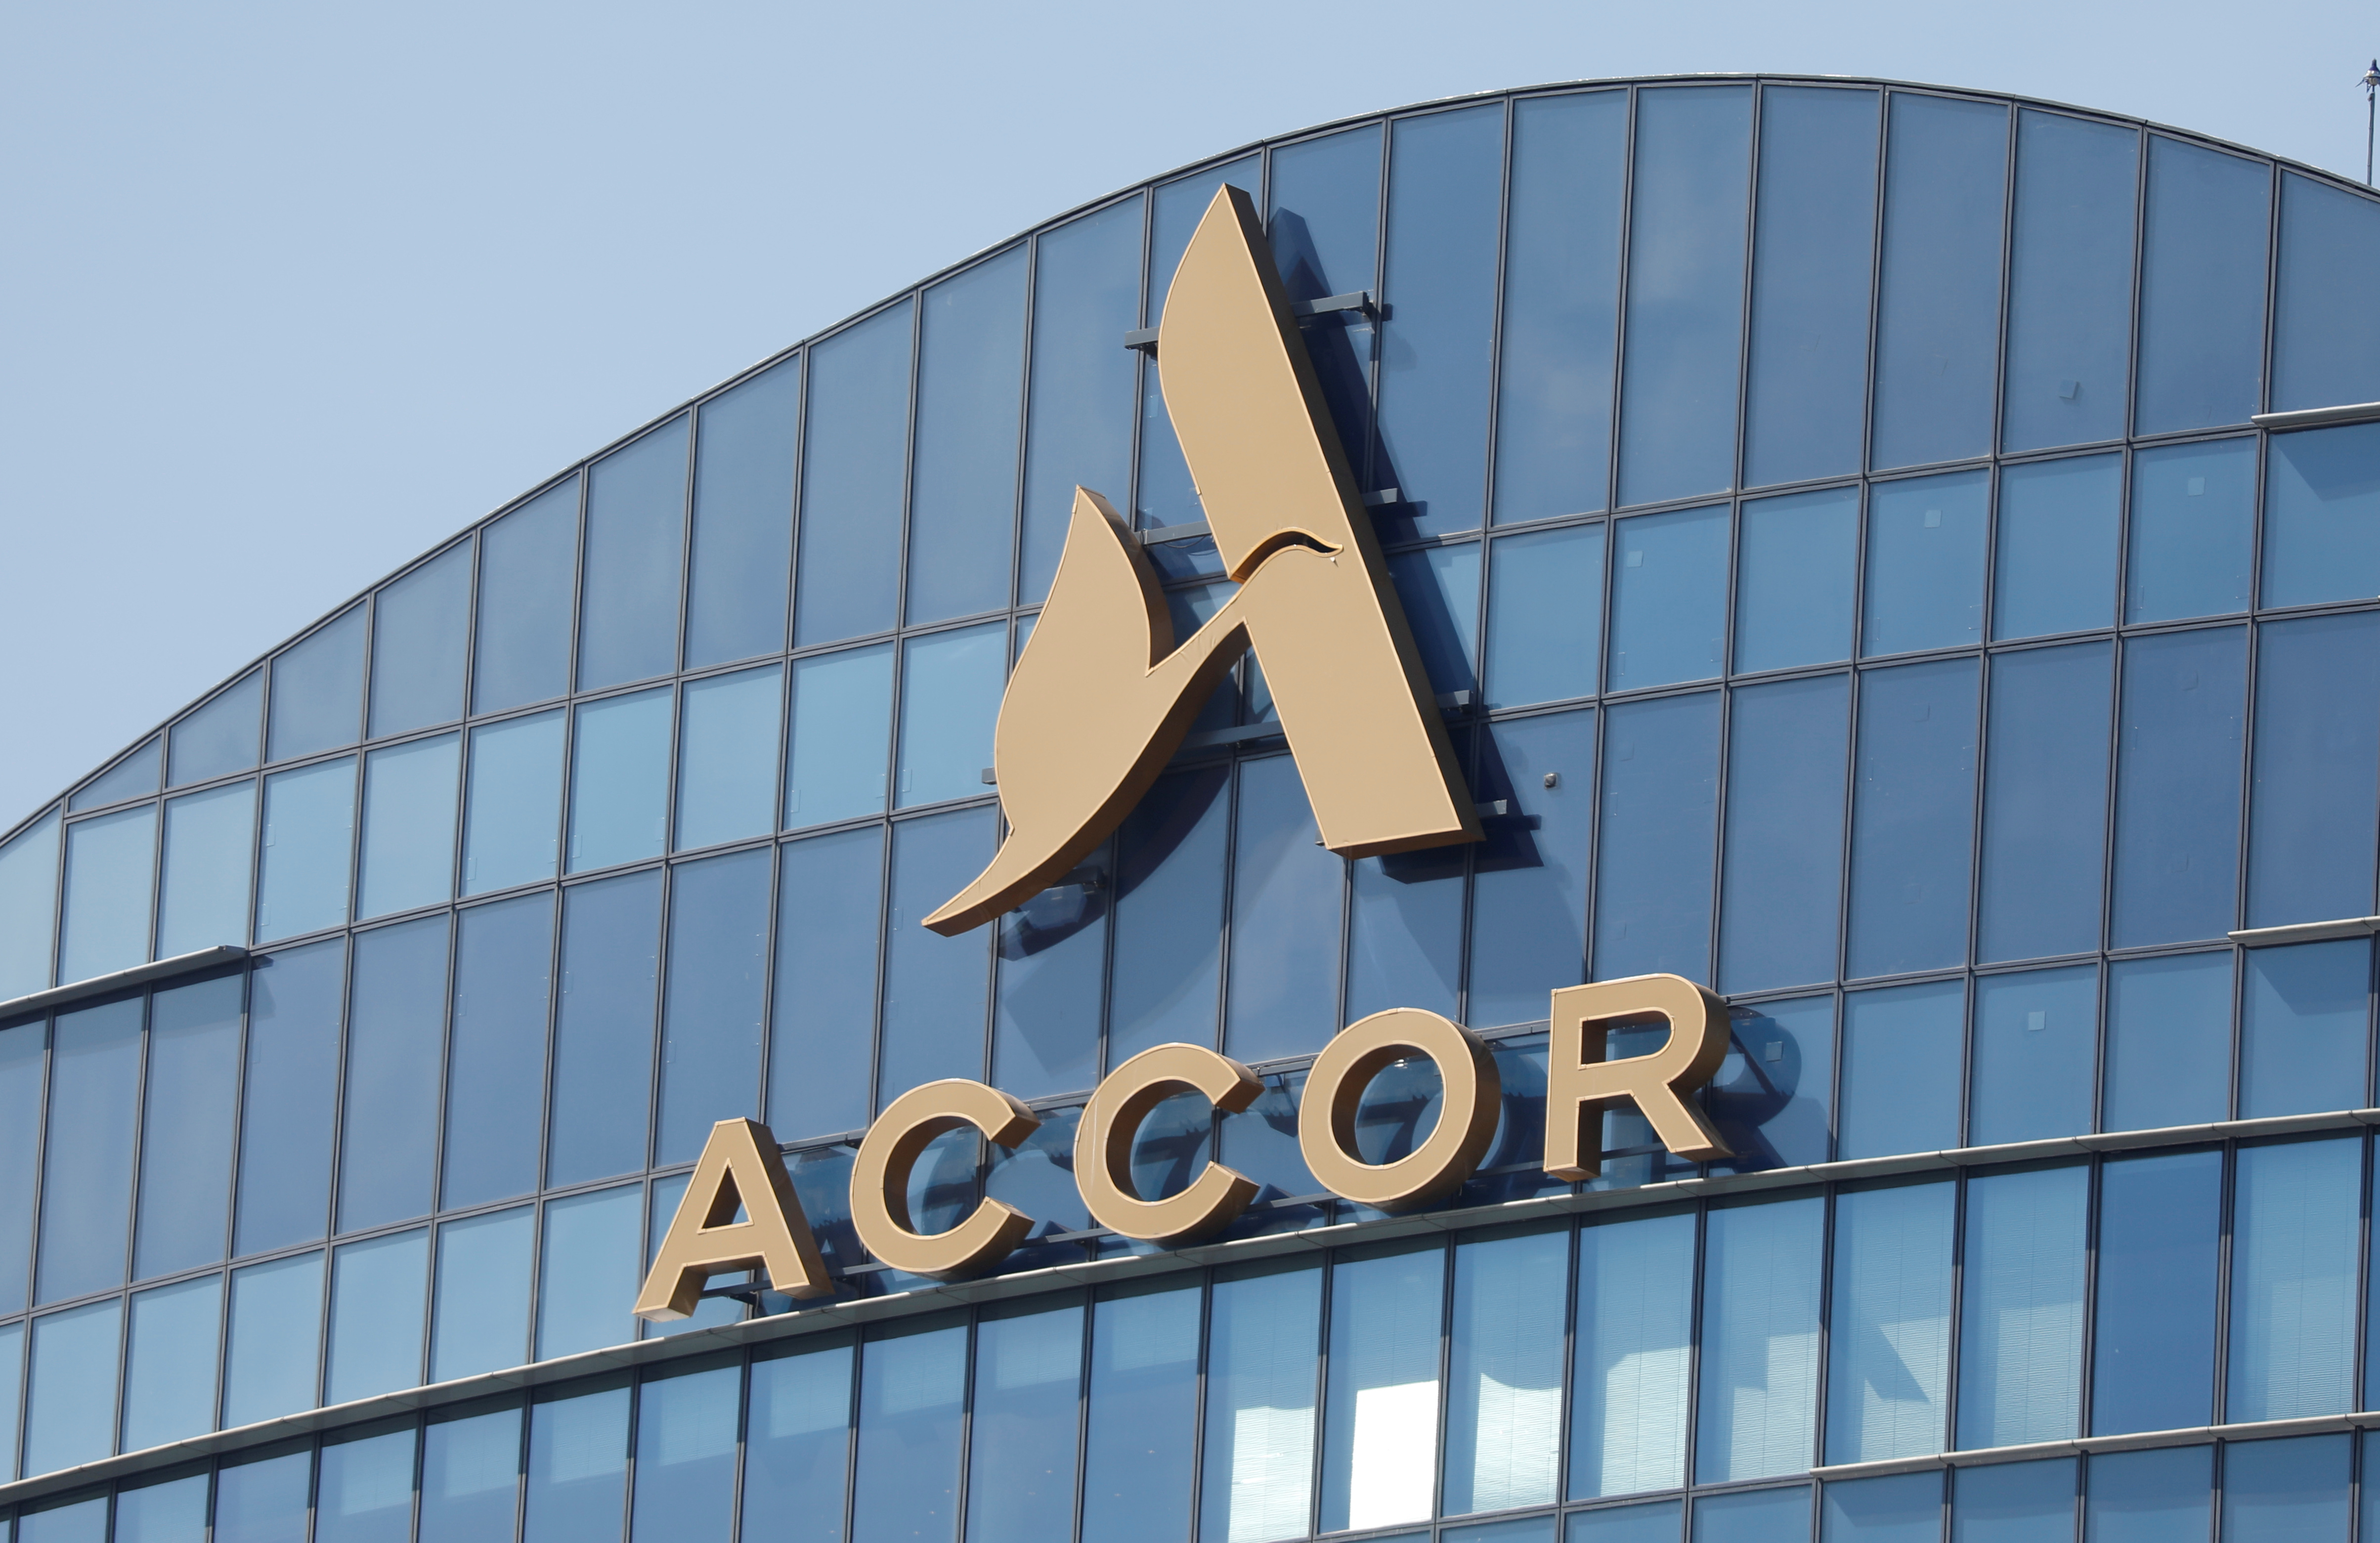 Accor headquarters in Issy-les-Moulineaux